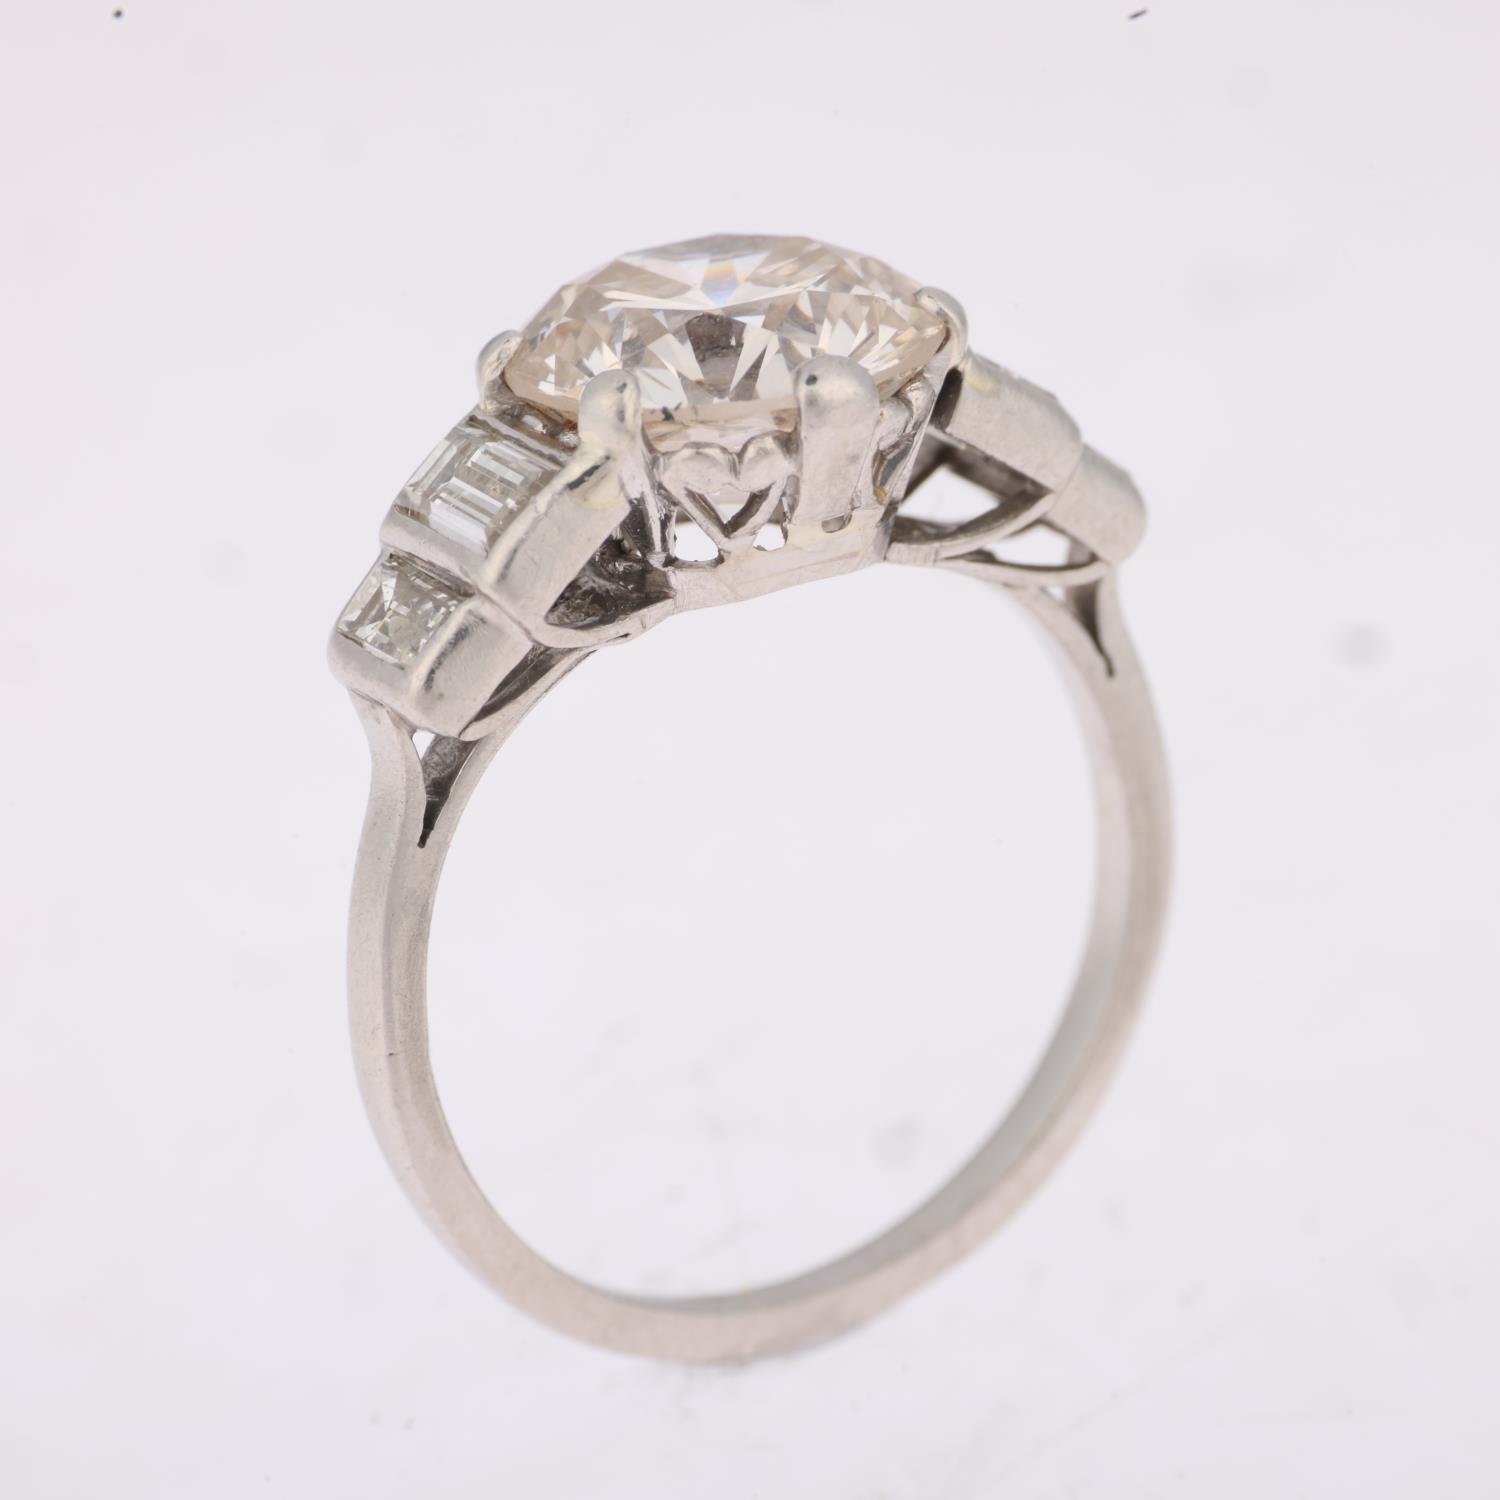 An Art Deco 2.5ct solitaire diamond ring, centrally claw set with 2.5ct round brilliant-cut diamond, - Image 2 of 4